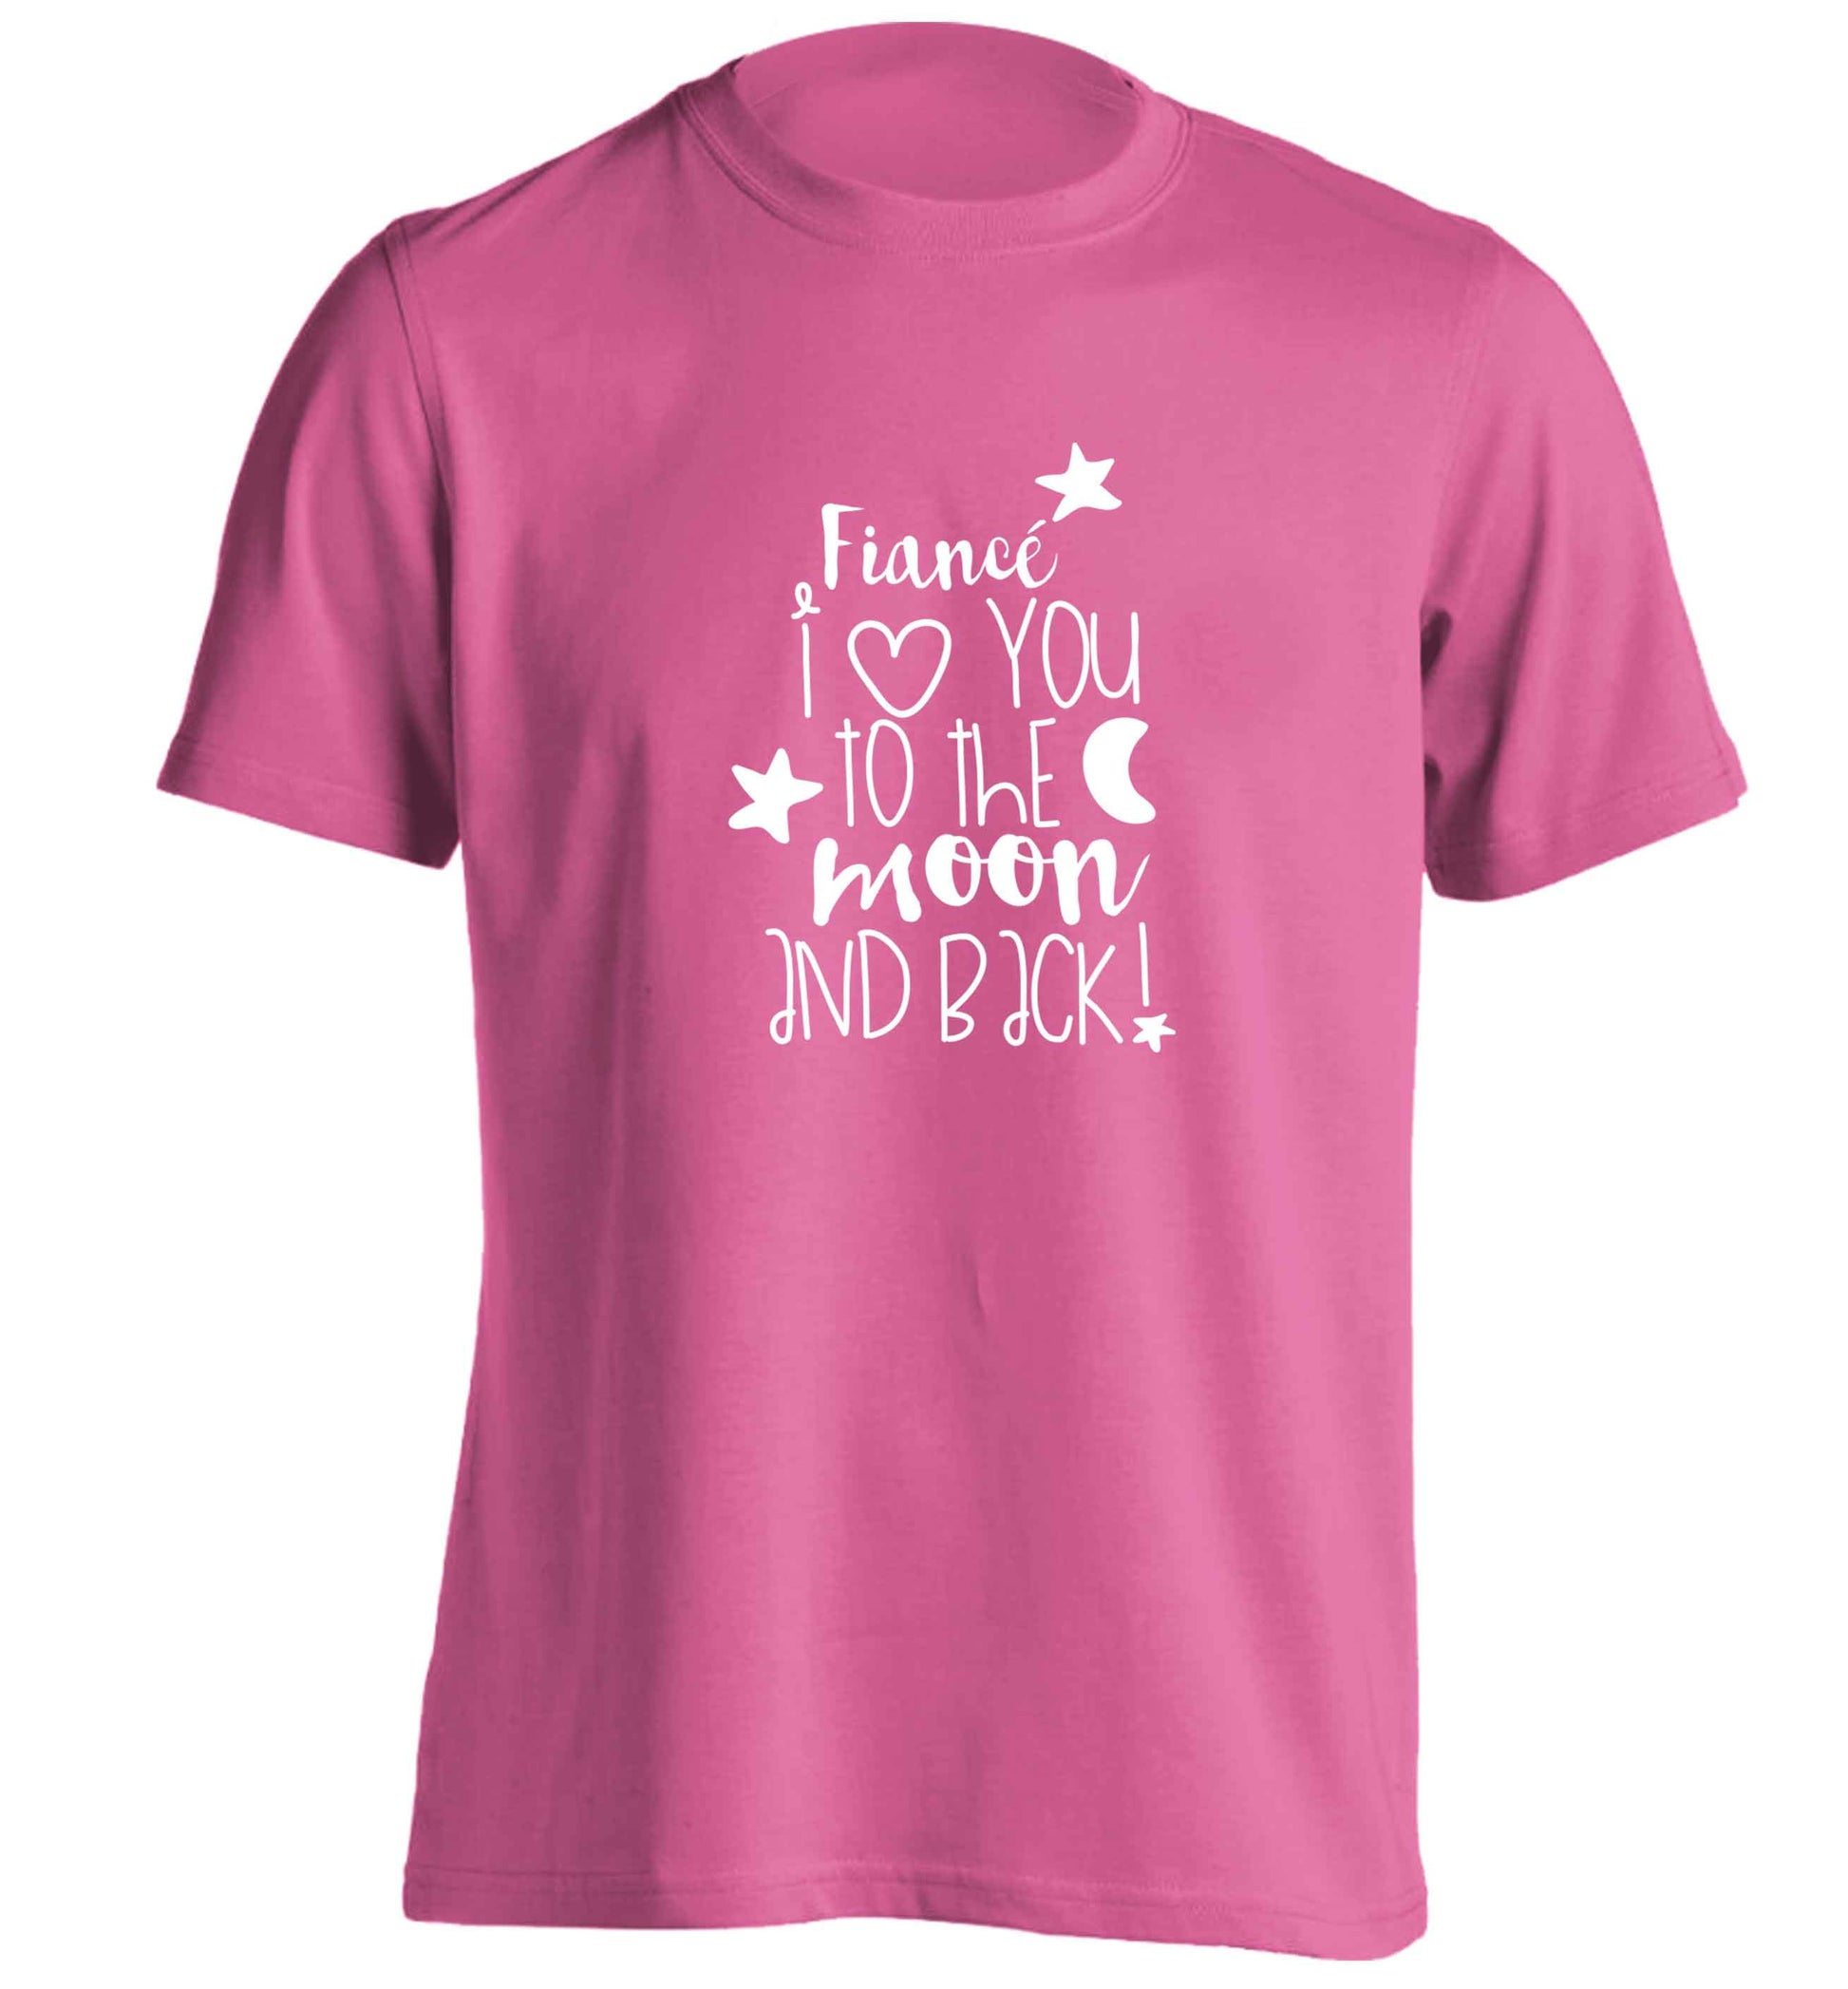 Fianc√© I love you to the moon and back adults unisex pink Tshirt 2XL